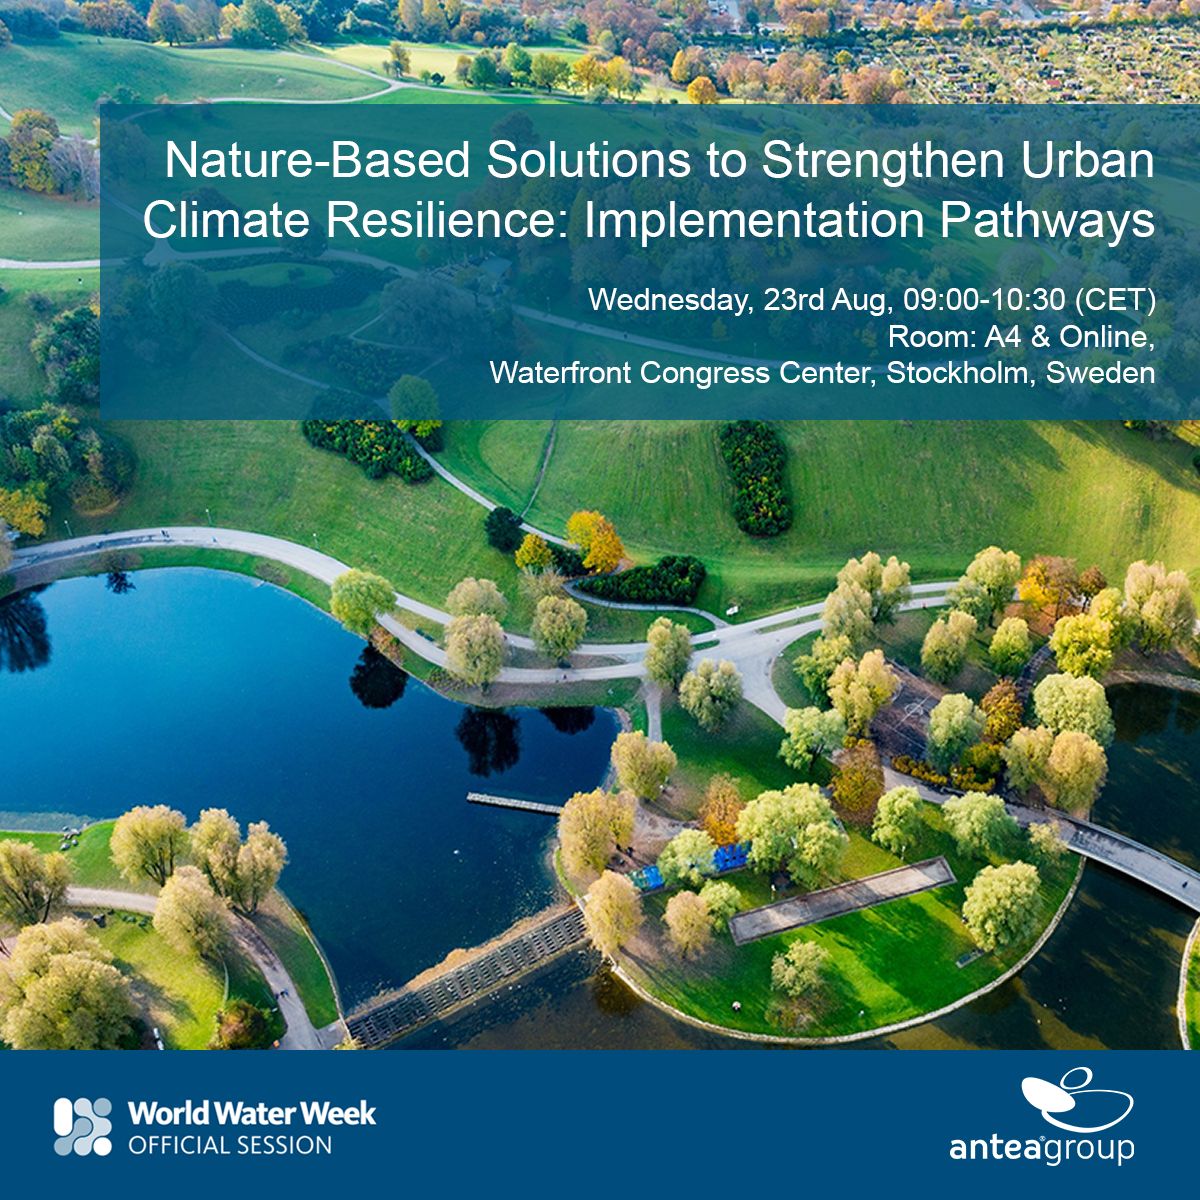 Join the #WorldWaterWeek23 session focusing on #naturebasedsolutions to strengthen Urban #climateresilience: Implementation Pathways. Green and Blue Corridors are key for sustainable #urbanenvironments.

lnkd.in/dX3qaz5B